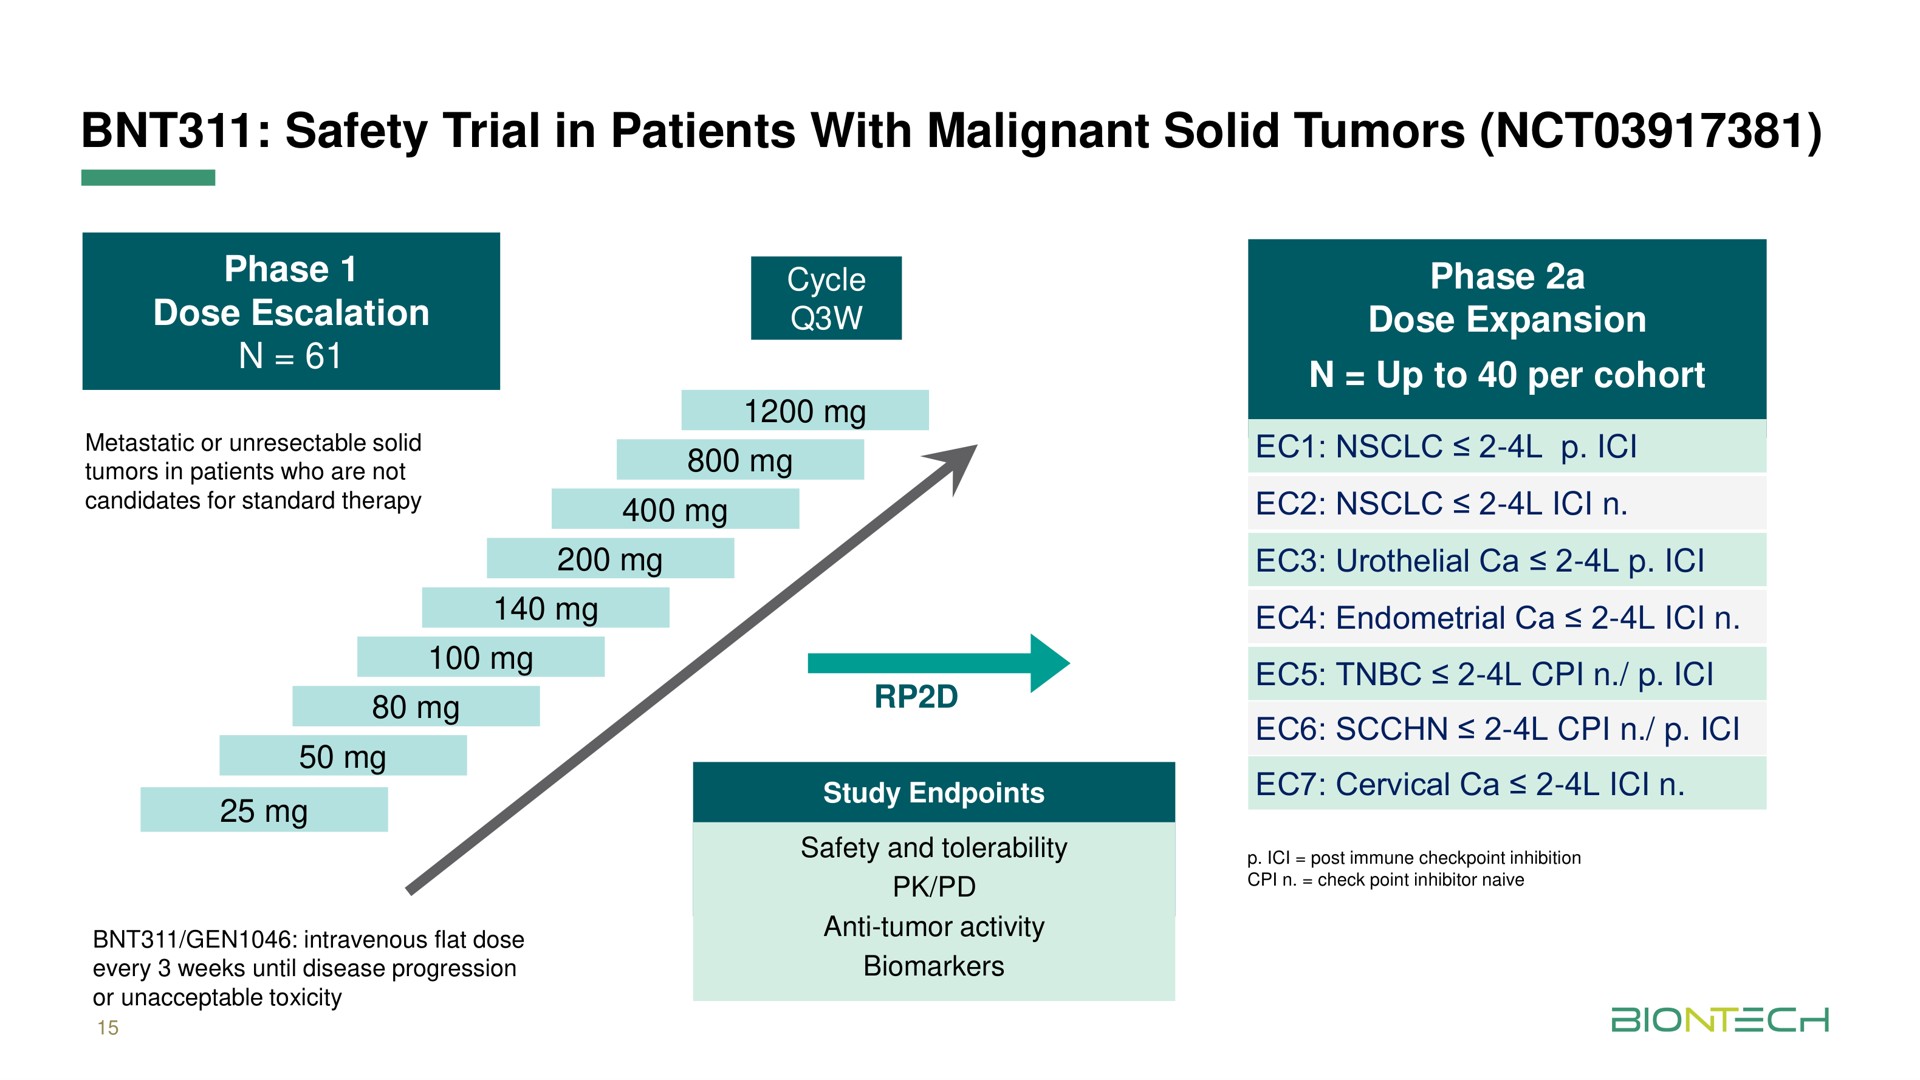 safety trial in patients with malignant solid tumors who are not bot | BioNTech